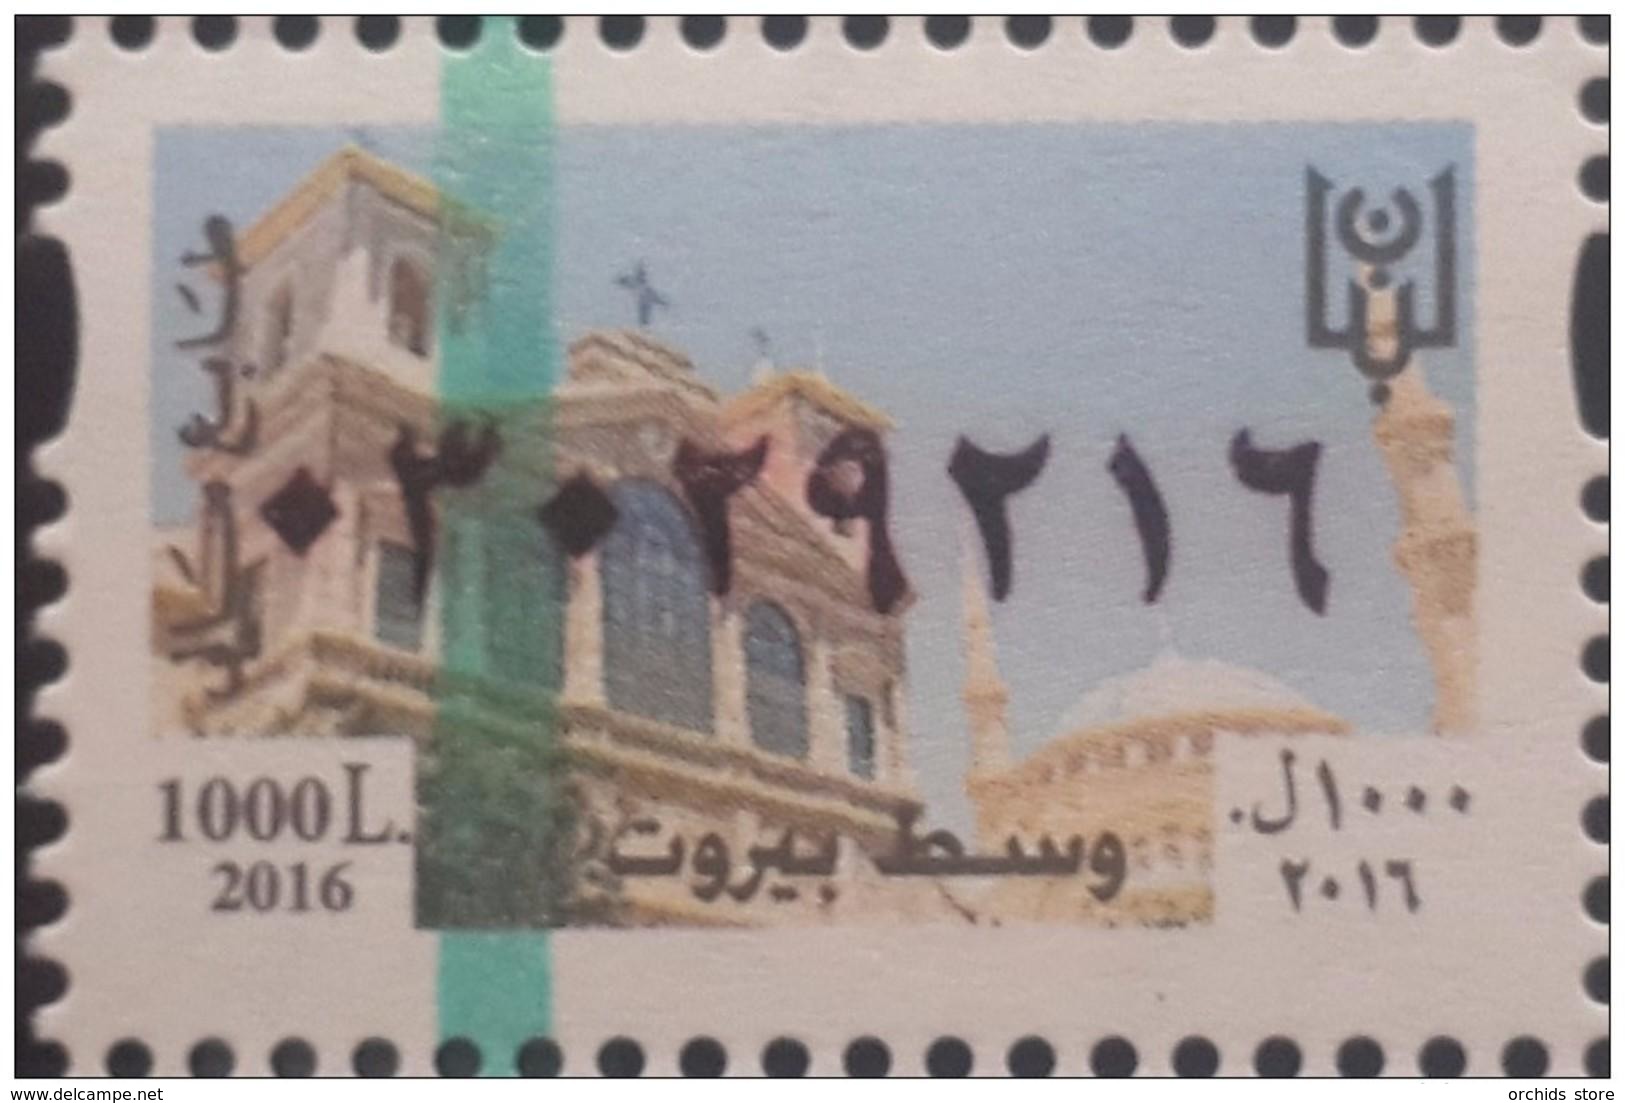 Lebanon 2016 NEW MNH Fiscal Revenue Stamp - 1000L Beirut Center - St George Cathedral & Al Amine Mosque - Libanon